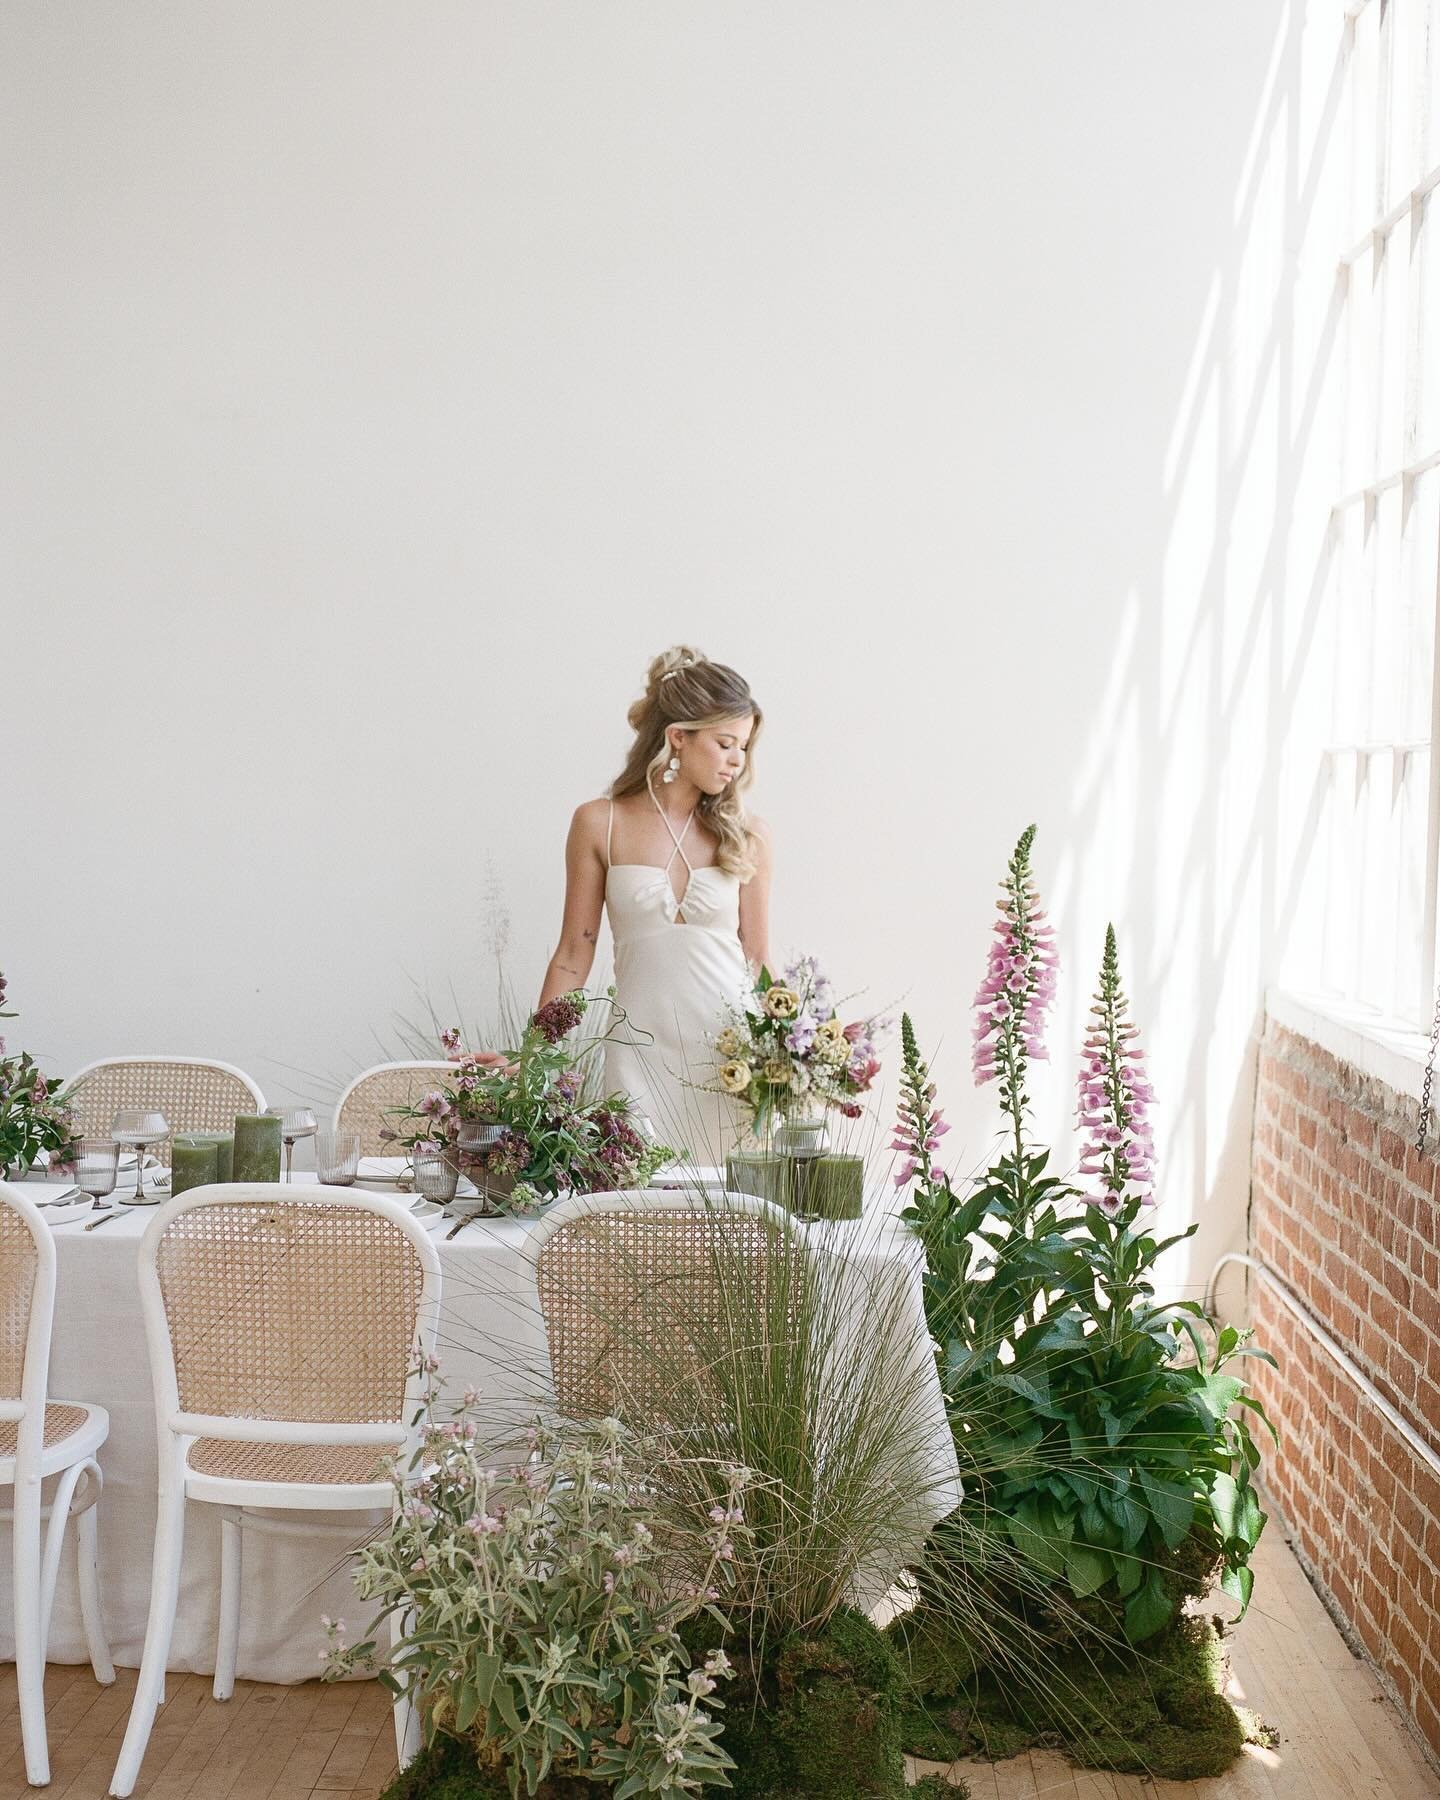 All the ineffable beauty dripping with whimsy designed by my oh so talented friend @gatherfloral. I&rsquo;ll leave these here and let these photos speak for themselves. 

design and florals: @gatherfloral 
design and planning: @wildeandsageco 
hair: 